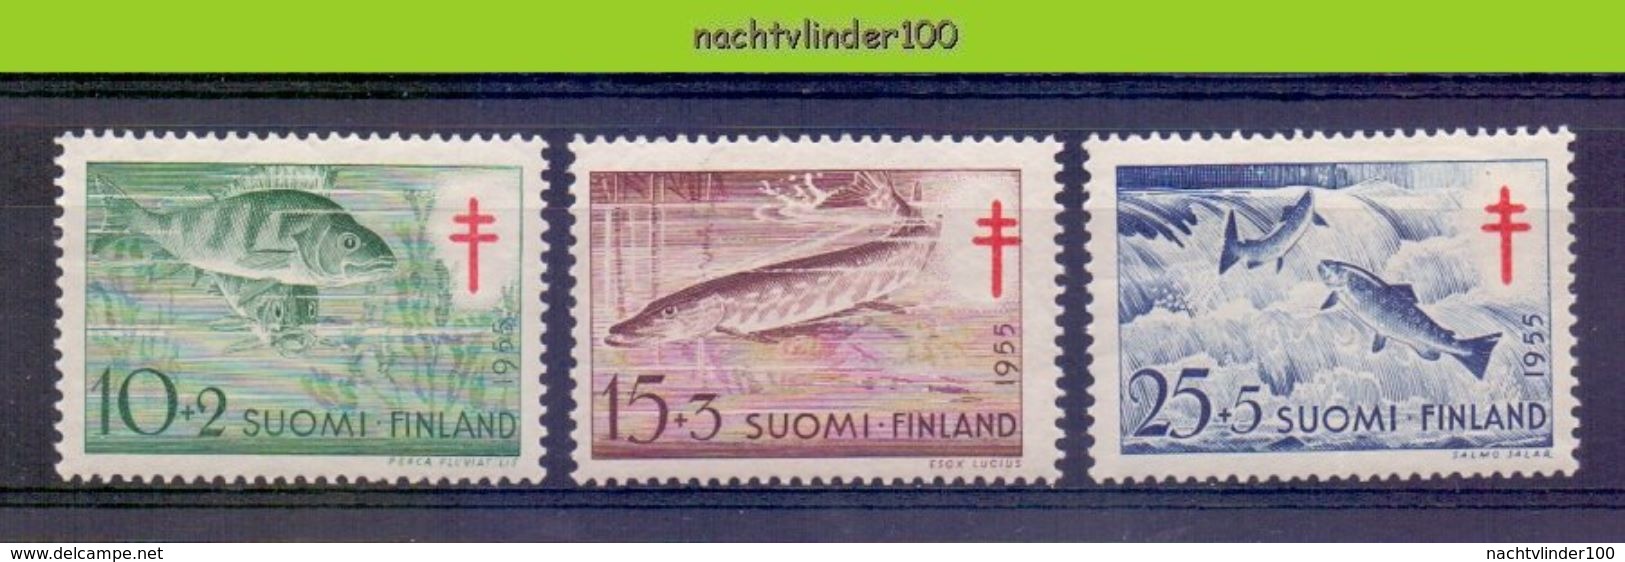 Nbm0626 FAUNA VISSEN FISH FISCHE POISSONS MARINE LIFE  FINLAND 1955 ONG/MH - Fishes